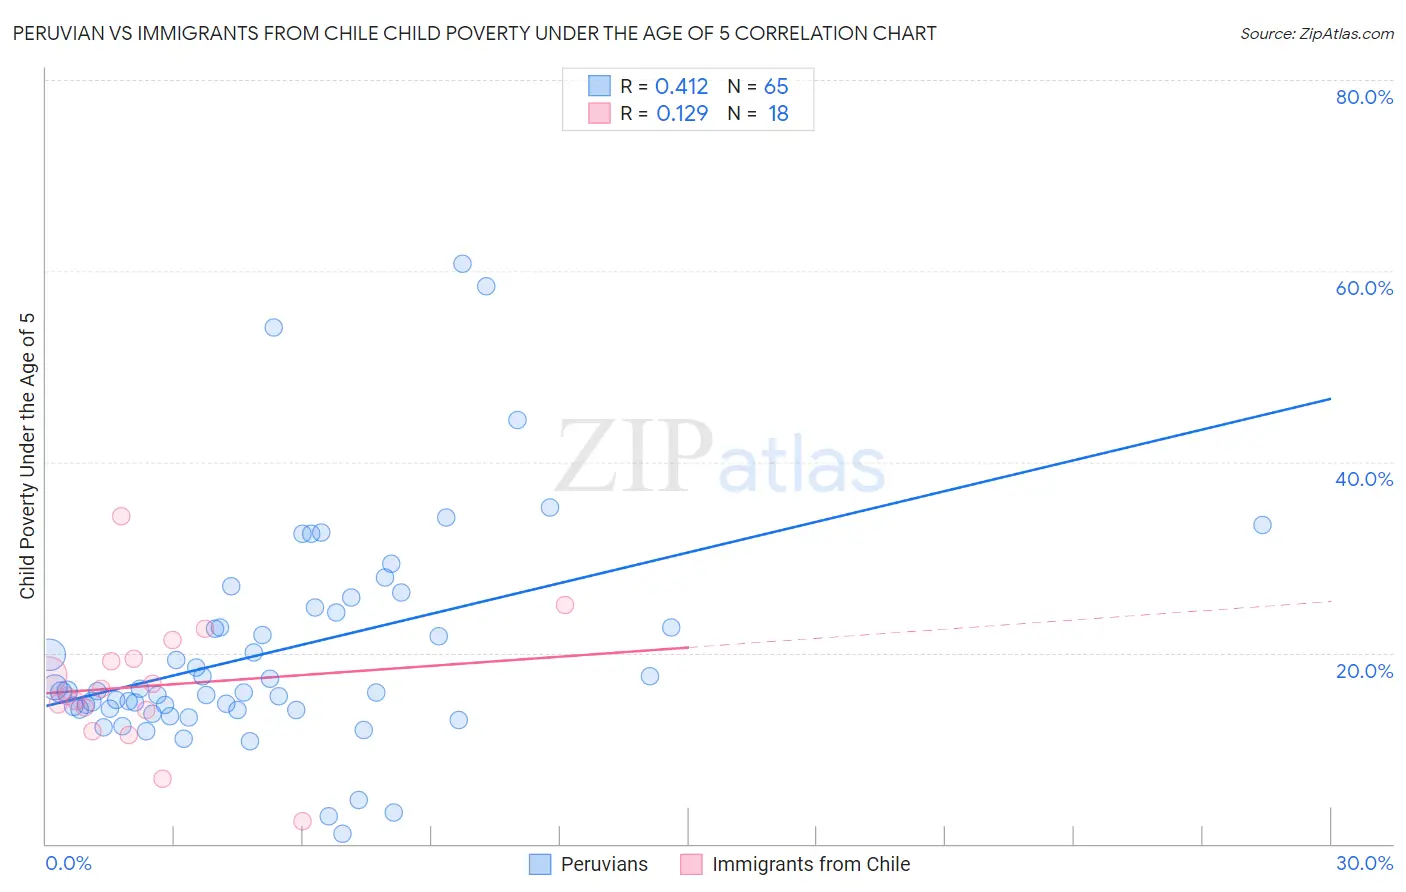 Peruvian vs Immigrants from Chile Child Poverty Under the Age of 5